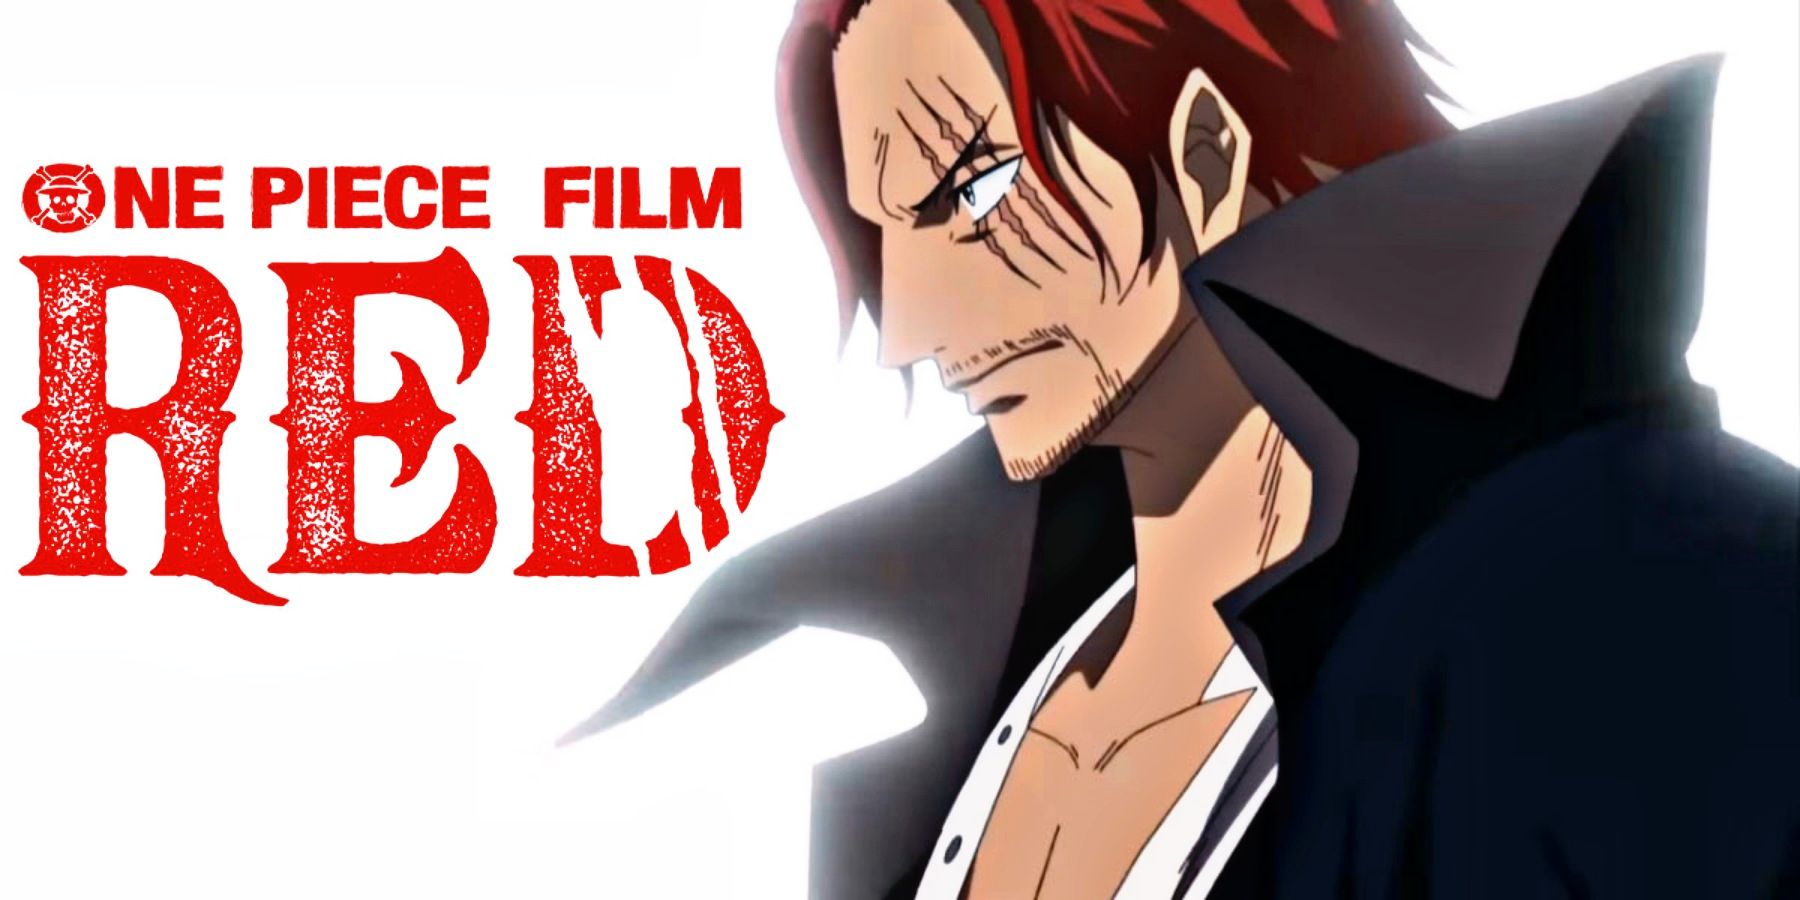 What will happen in One Piece: RED?